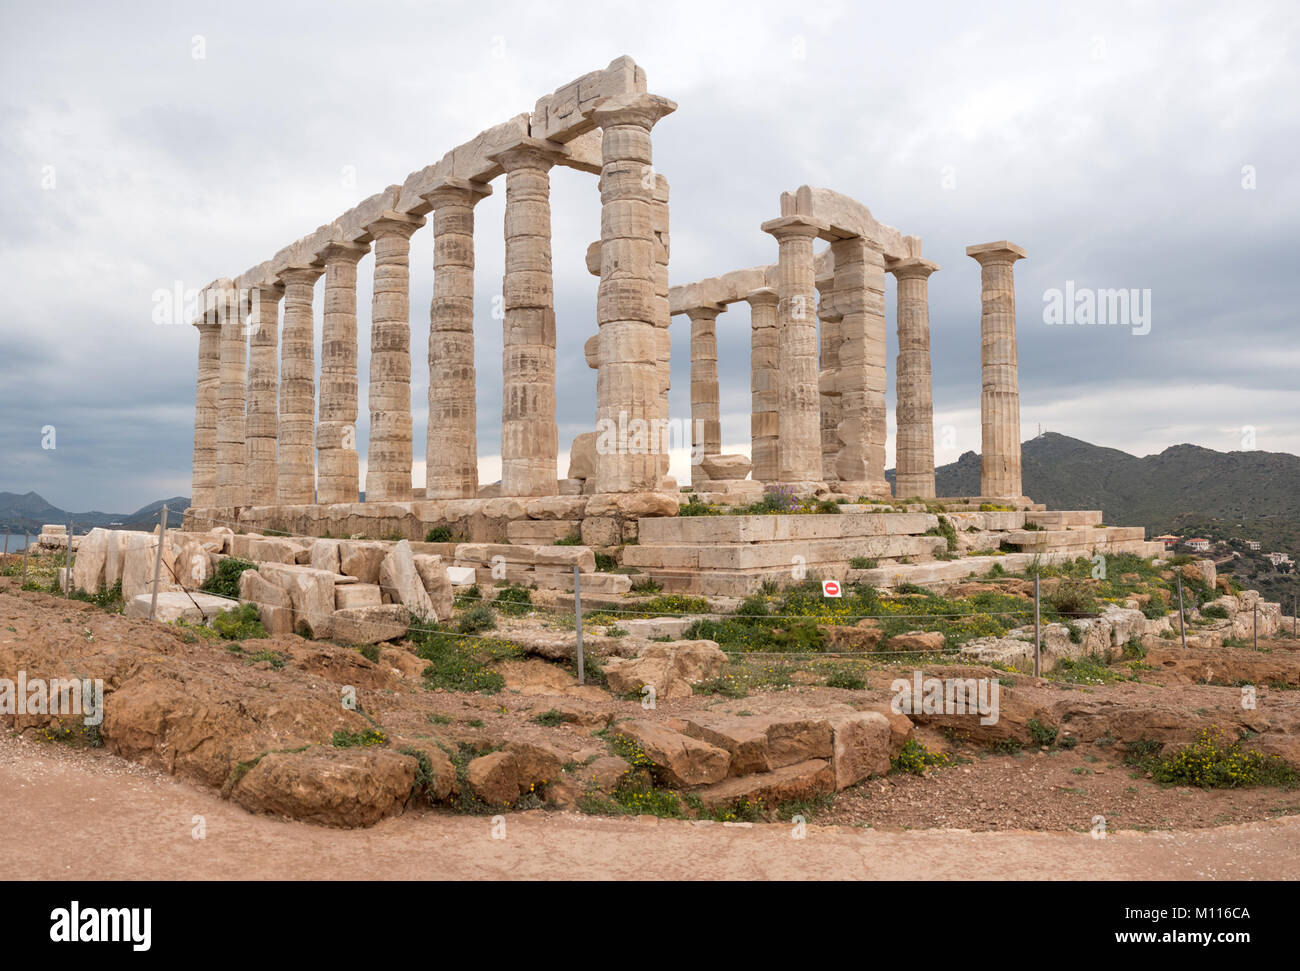 Ruins of an ancient Greek temple of Poseidon under dramatic cloudy sky, Cape Sounion, Greece Stock Photo